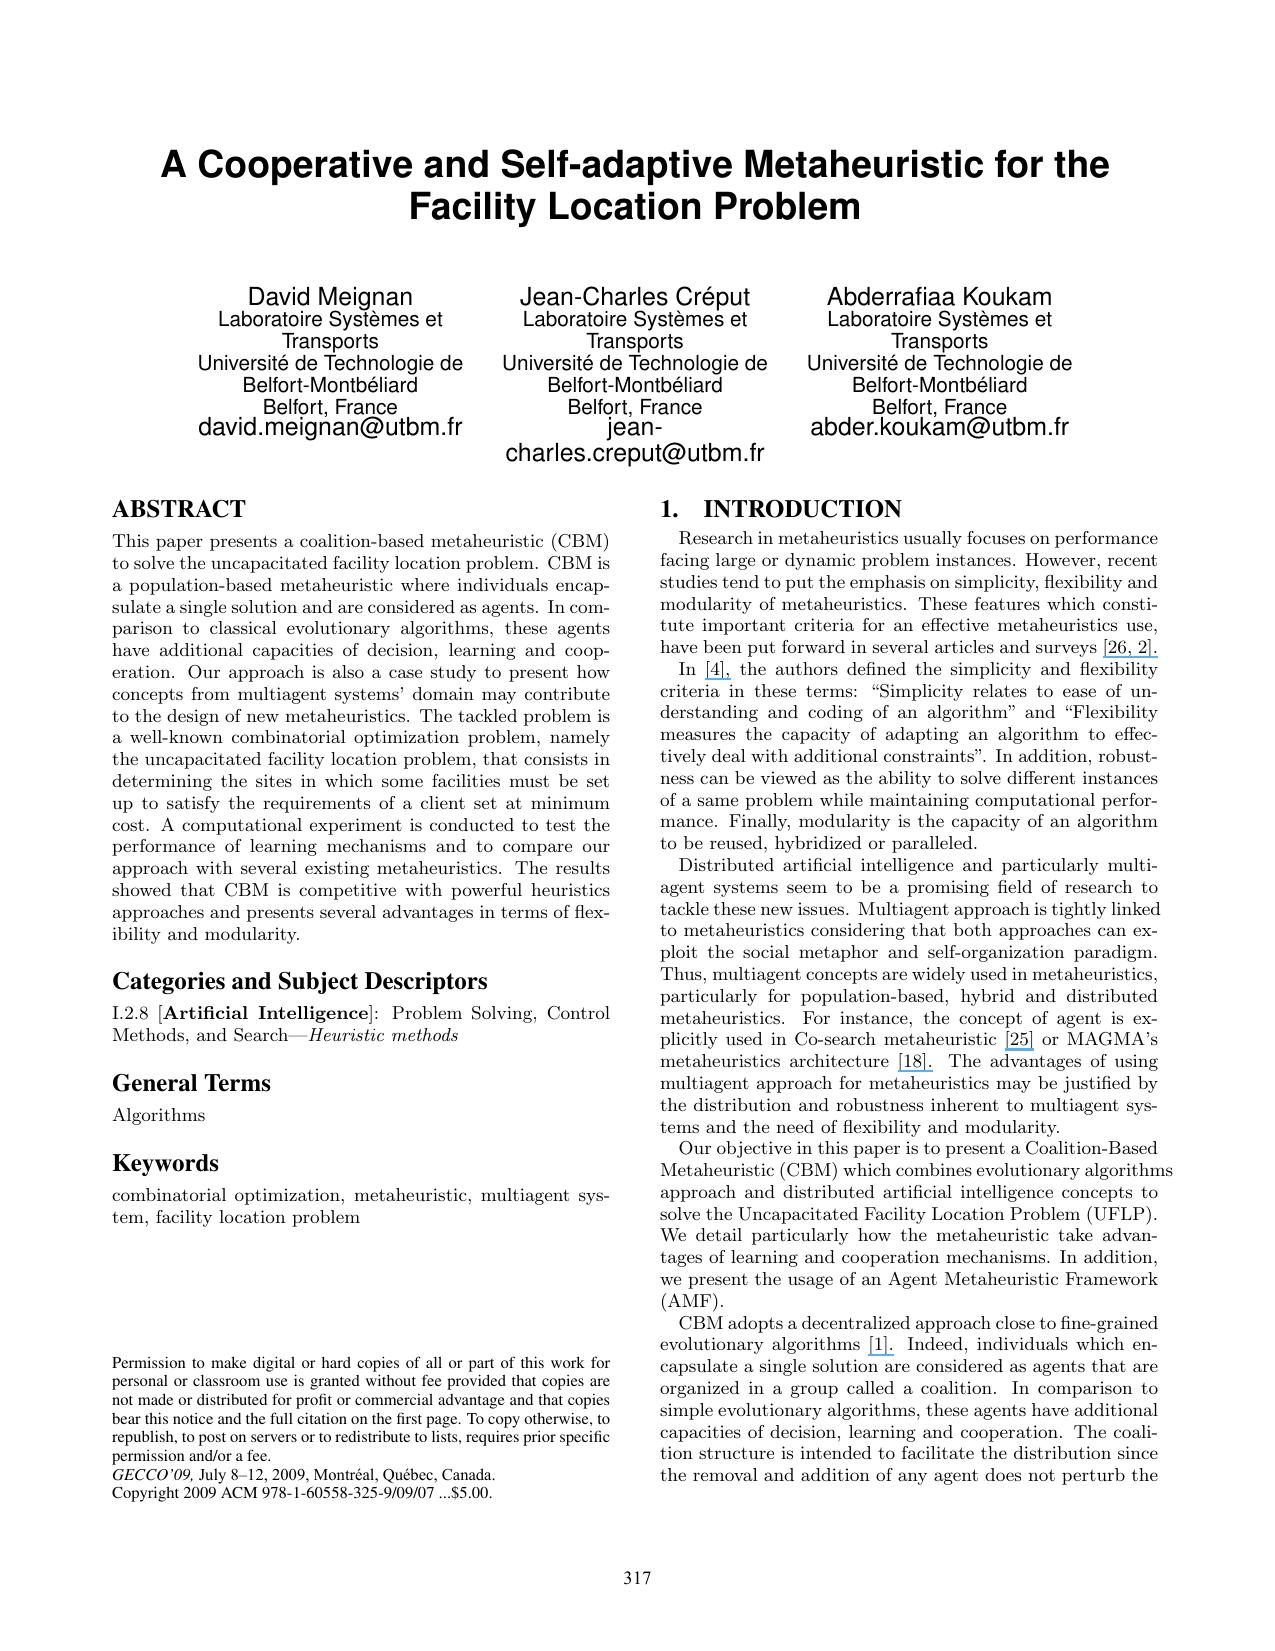 A Cooperative and Self-adaptive Metaheuristic for the Facility Location Problem - Paper